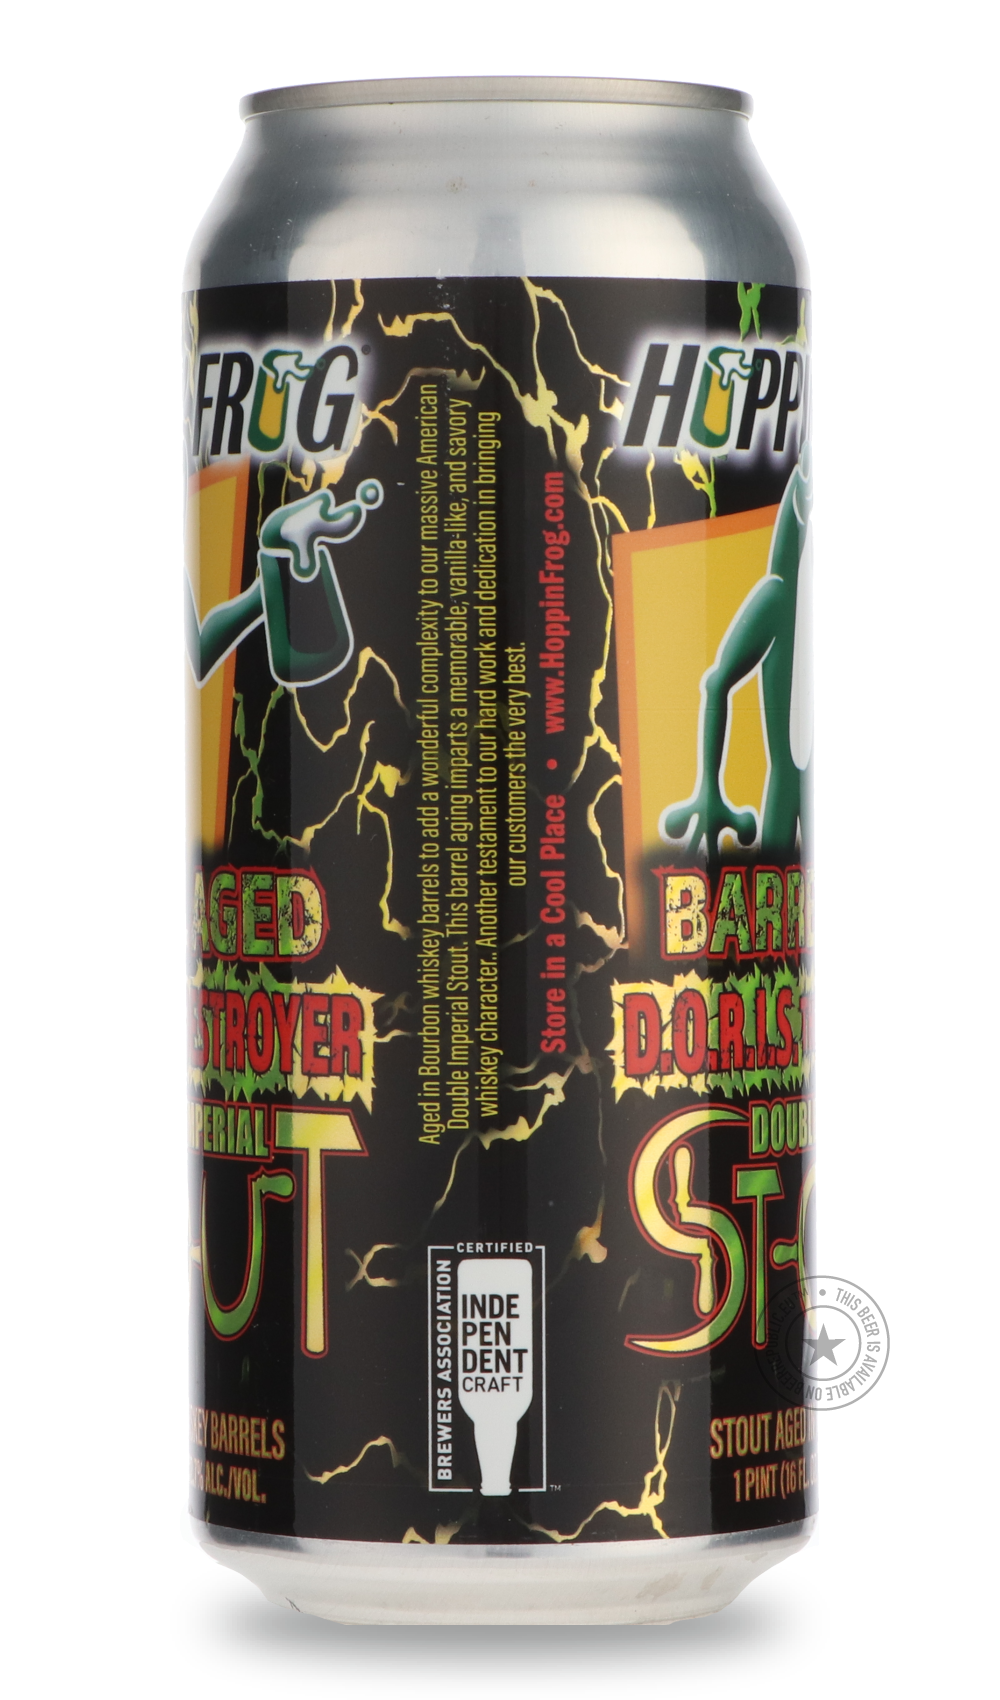 -Hoppin' Frog- Barrel Aged D.O.R.I.S. The Destroyer-Stout & Porter- Only @ Beer Republic - The best online beer store for American & Canadian craft beer - Buy beer online from the USA and Canada - Bier online kopen - Amerikaans bier kopen - Craft beer store - Craft beer kopen - Amerikanisch bier kaufen - Bier online kaufen - Acheter biere online - IPA - Stout - Porter - New England IPA - Hazy IPA - Imperial Stout - Barrel Aged - Barrel Aged Imperial Stout - Brown - Dark beer - Blond - Blonde - Pilsner - Lag